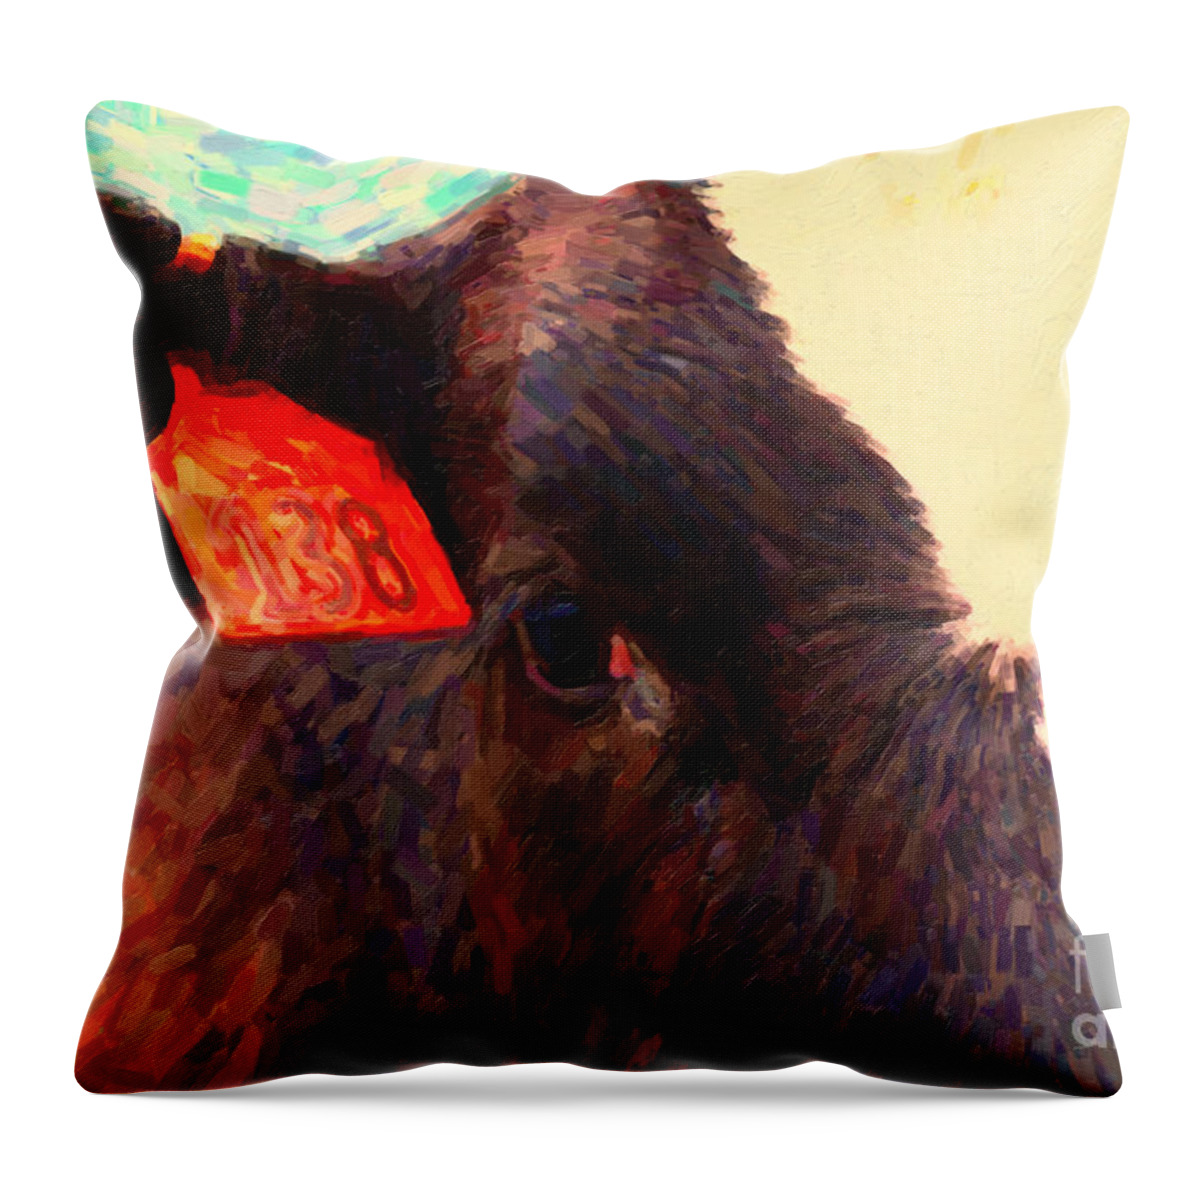 Wildlife Throw Pillow featuring the photograph Cow 138 Reinterpreted by Wingsdomain Art and Photography